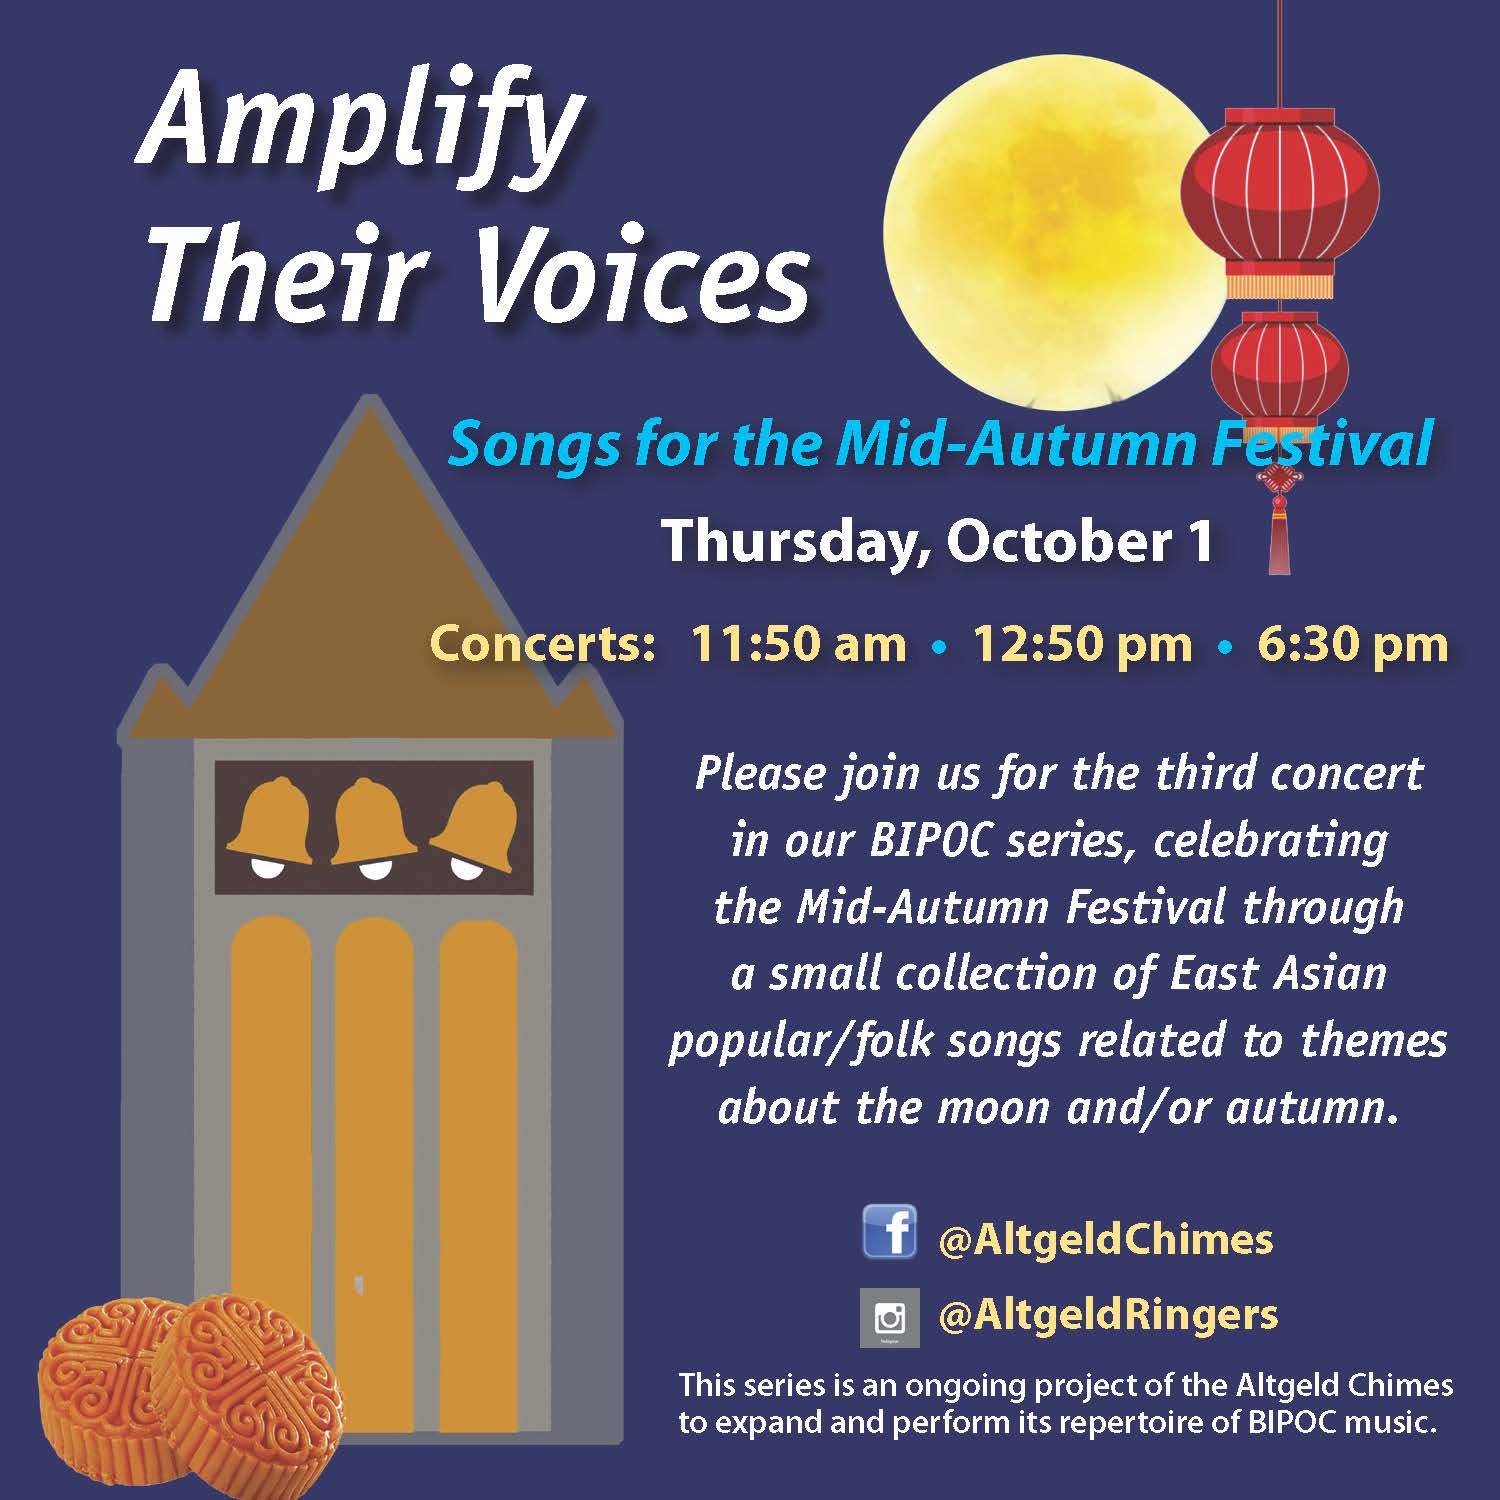 Graphic featuring details about the Altgeld Chimes Mid Autumn Concert on Thursday, October 1st. The image is dark blue with a graphc representation of the Altgeld bell tower, and two moon cakes at the bottom left of the image. Text is on the right side of the image. Image from Facebook. 